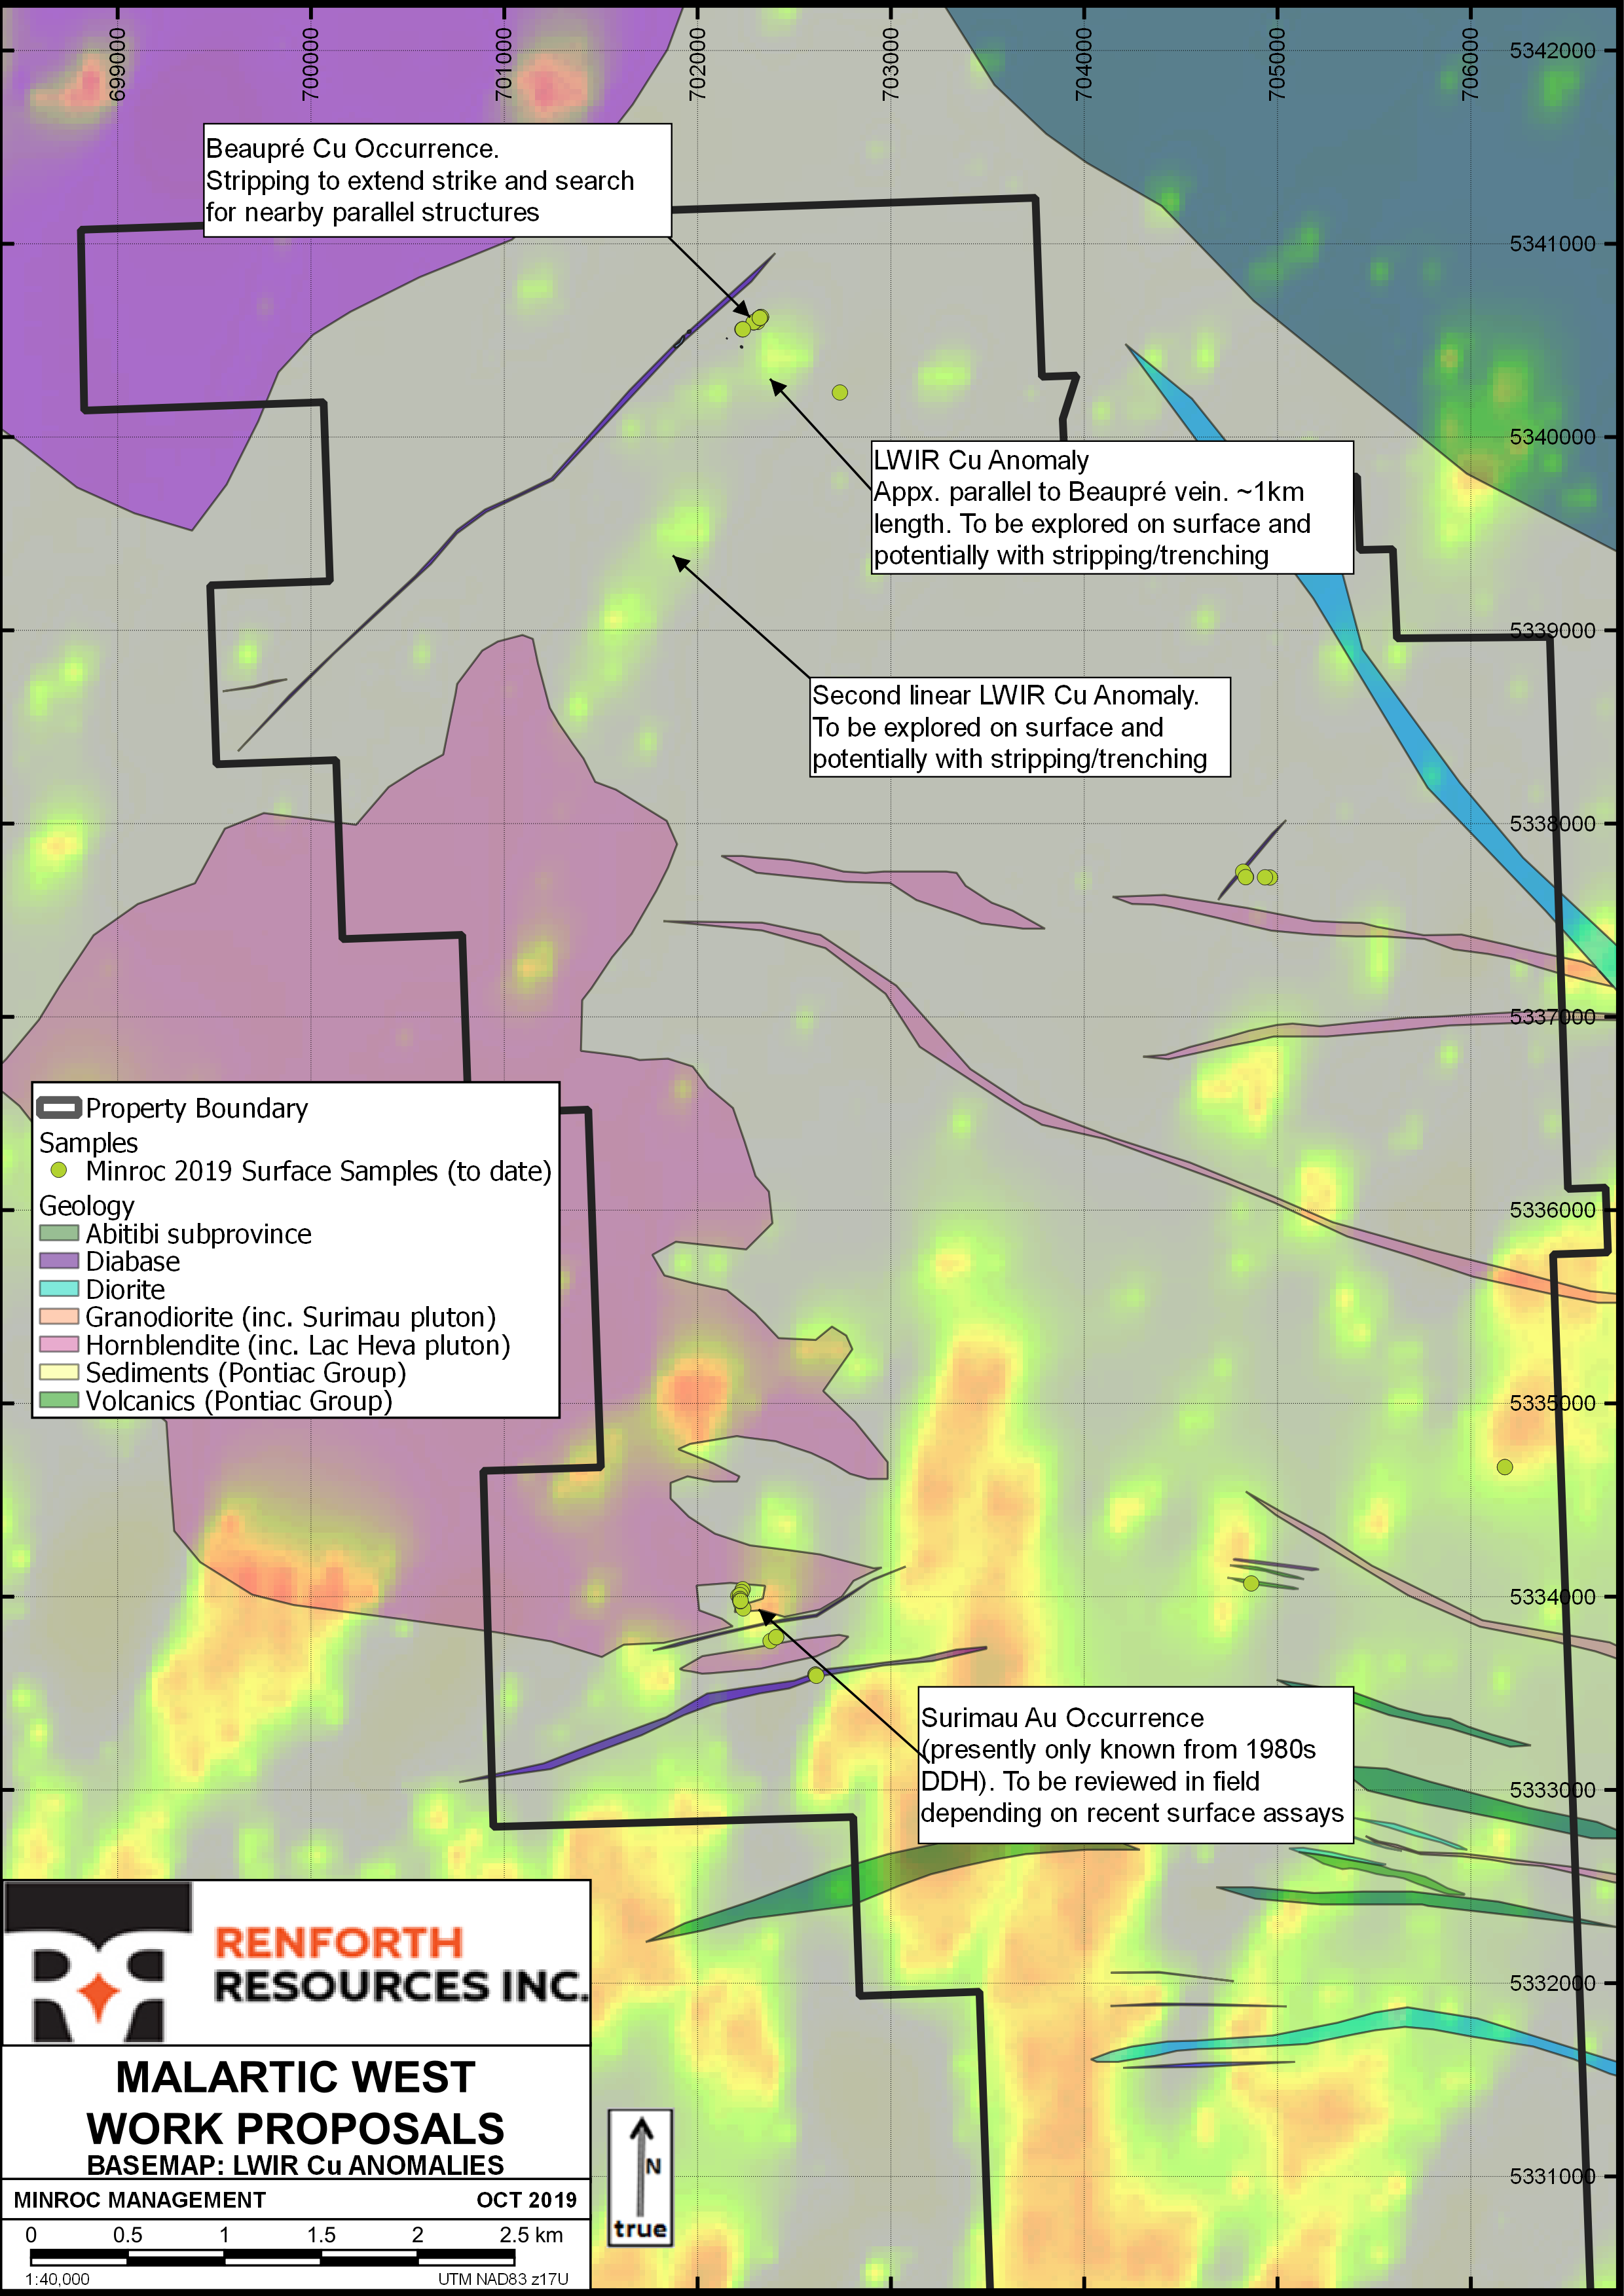 Renforth Resources Inc., Thursday, October 31, 2019, Press release picture